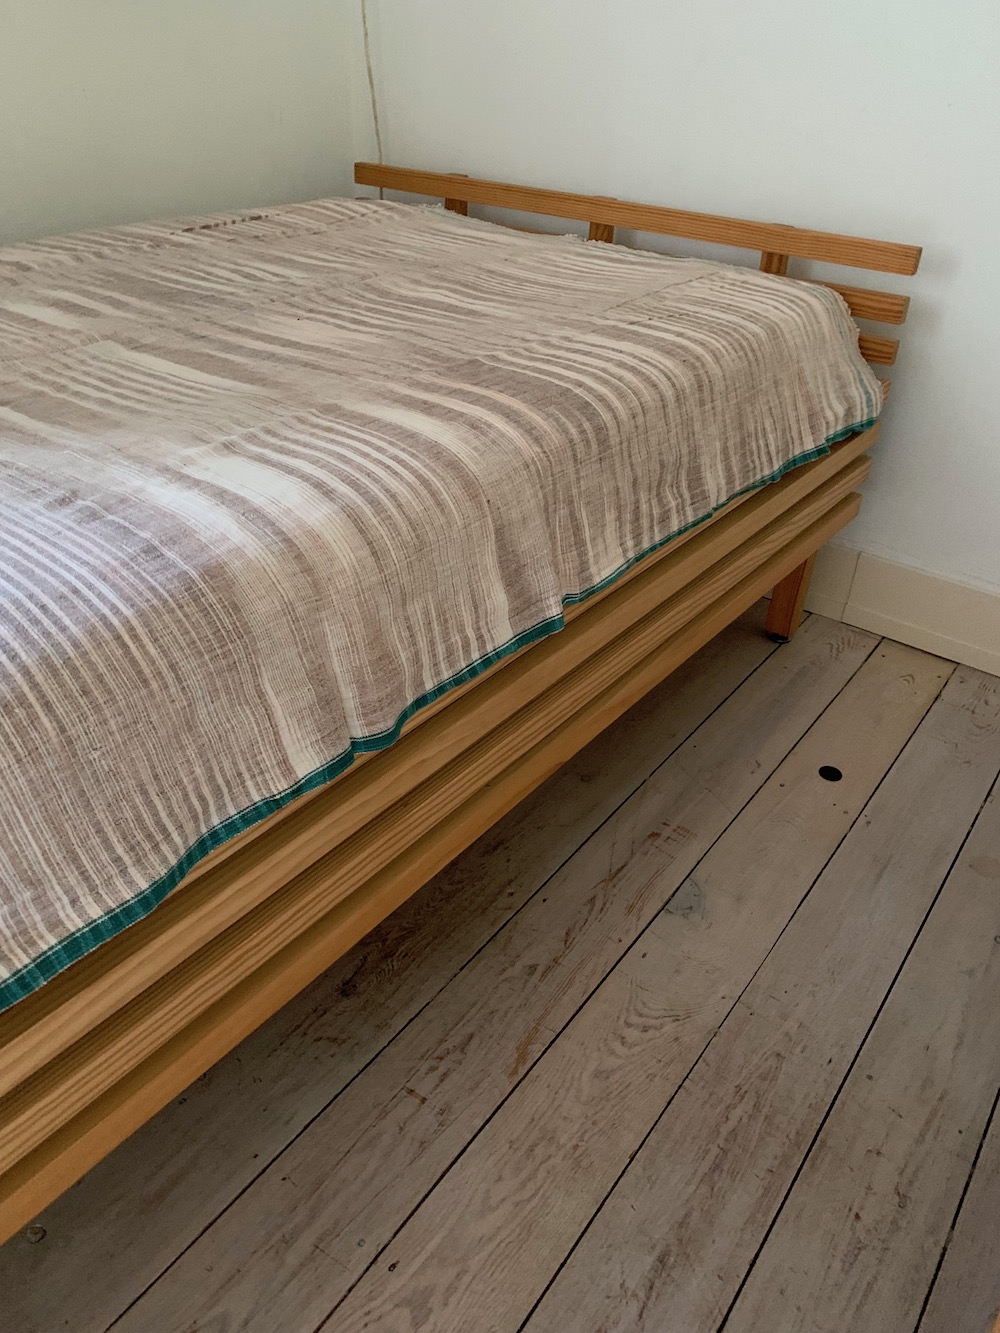 vintage beds, slates, pair of beds, wooden beds, design beds, lit design, lit vintage, paire de lits, lits en bois, bedroom, bedroom decor, vintage bedroom